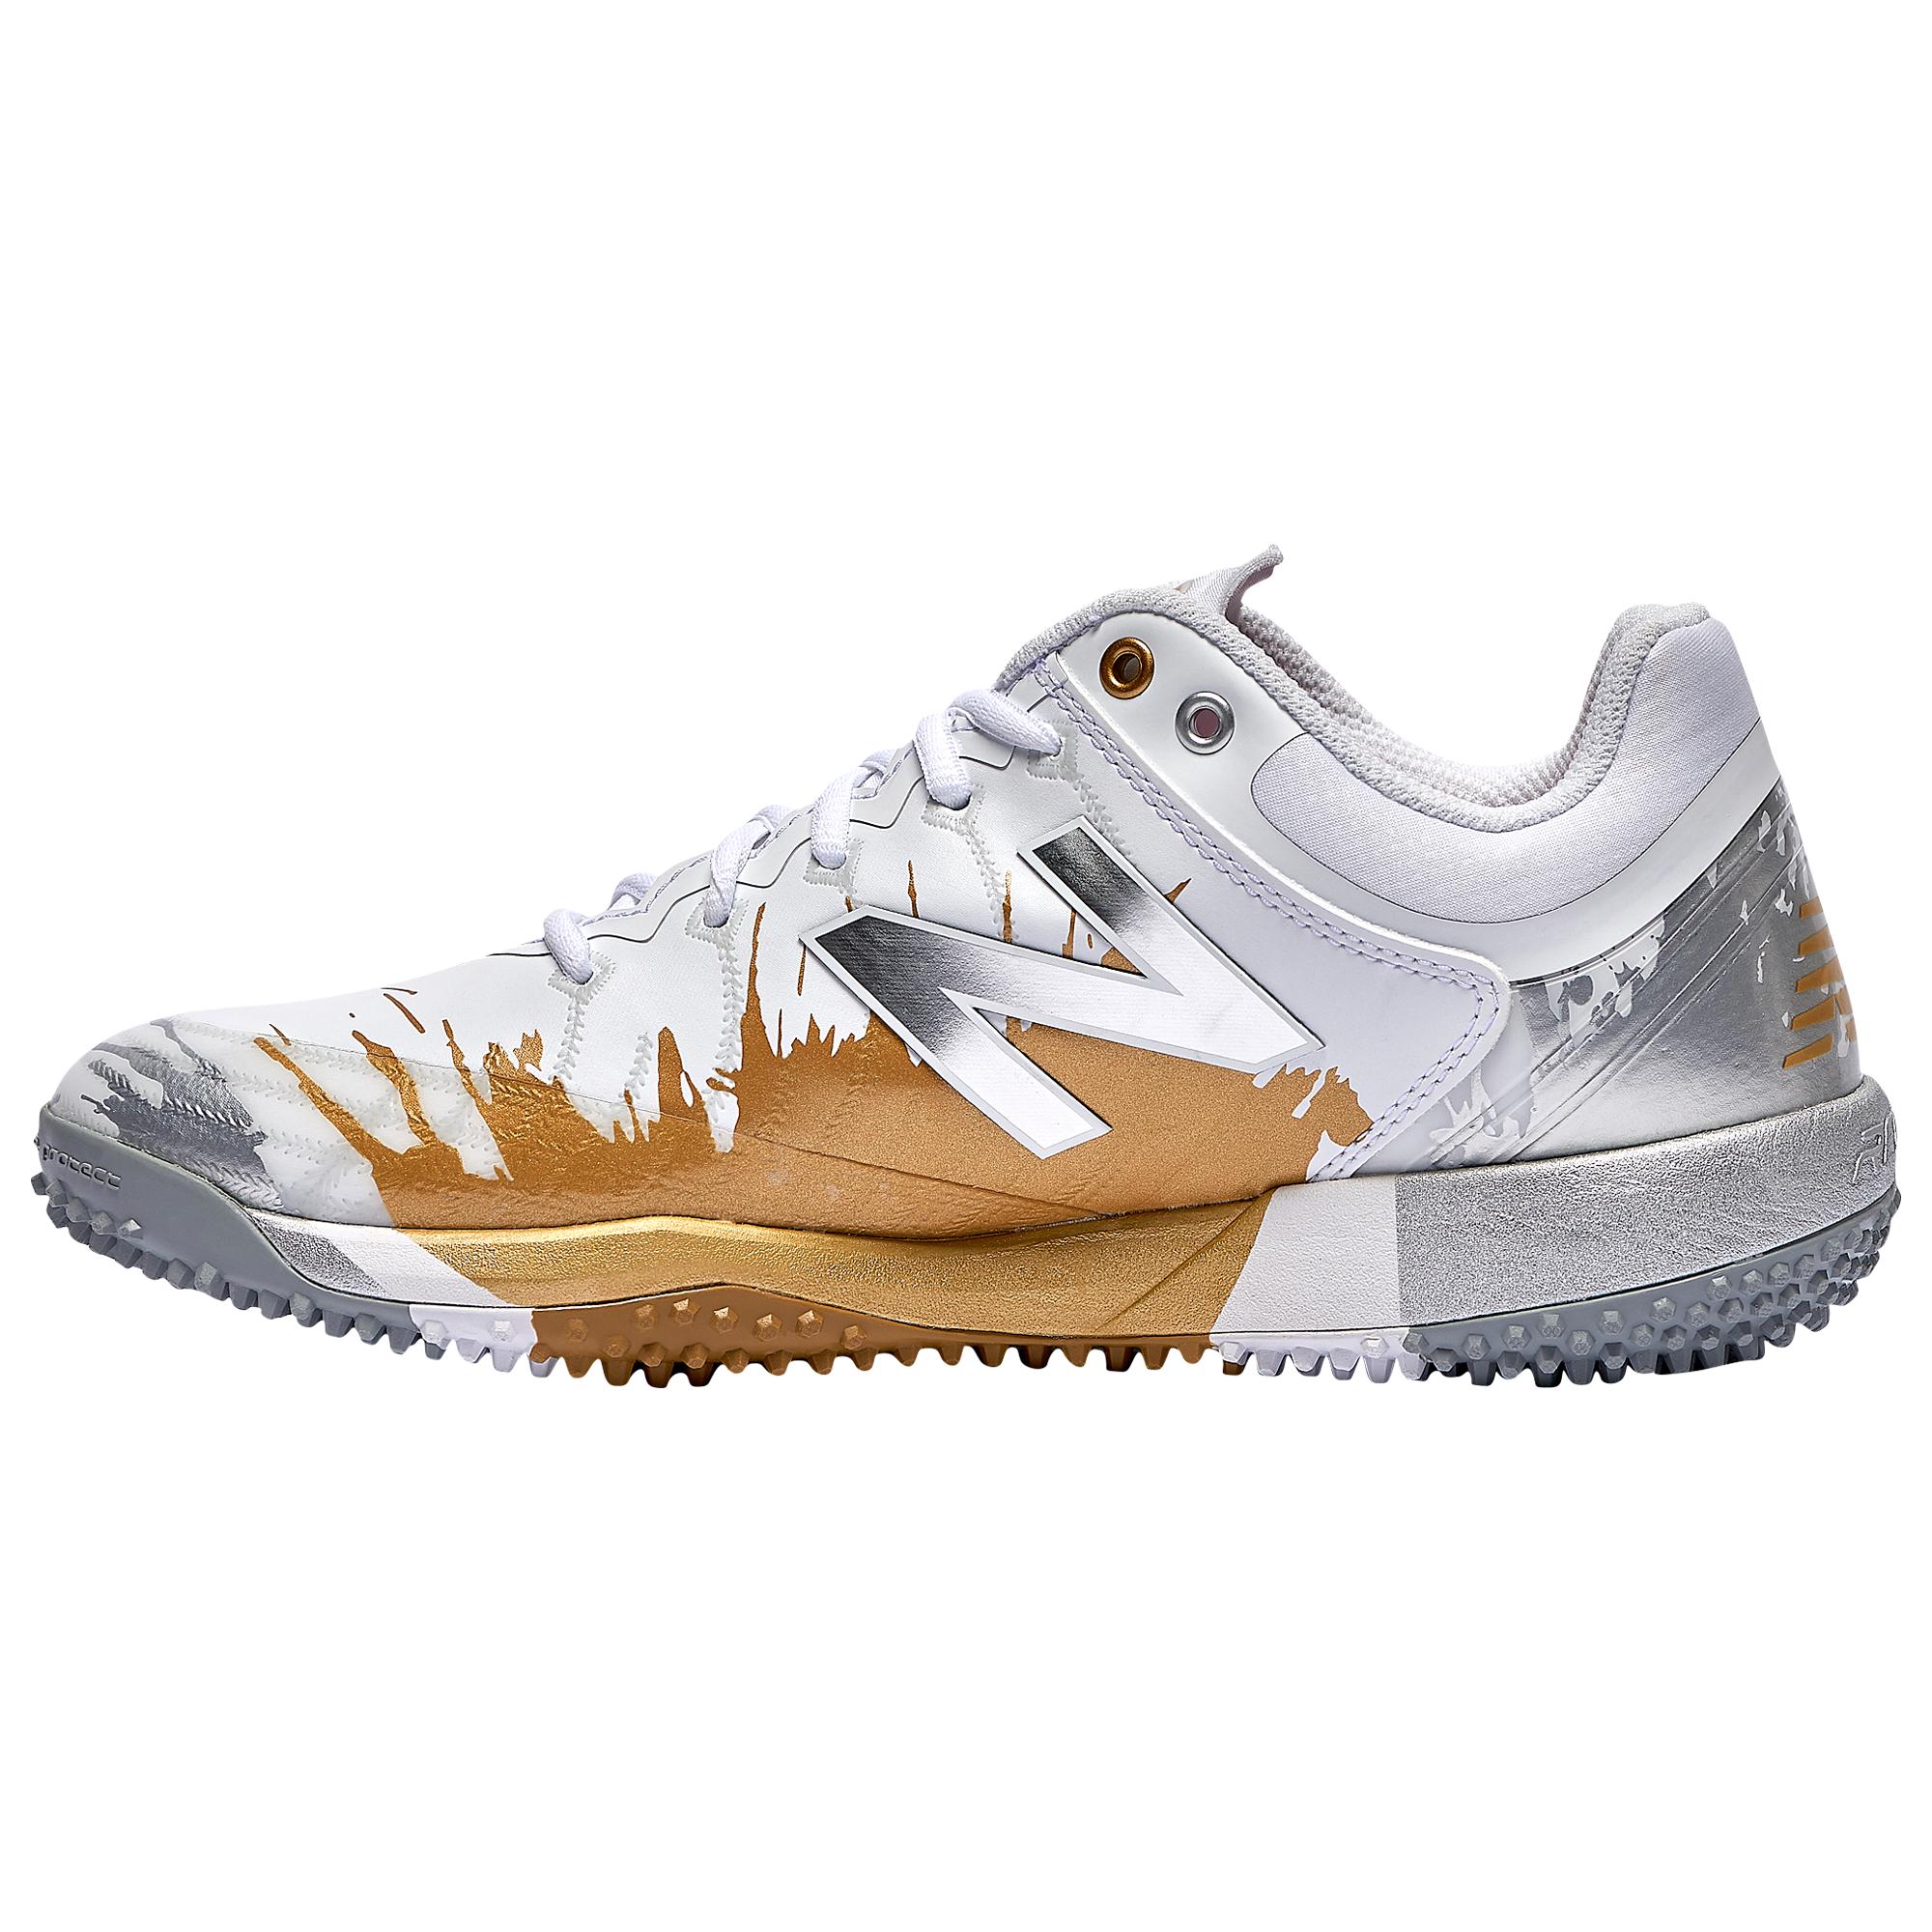 New Balance Rubber 4040v5 Turf Playoff Pack Turf Shoes in Silver/Gold  (Metallic) for Men - Lyst